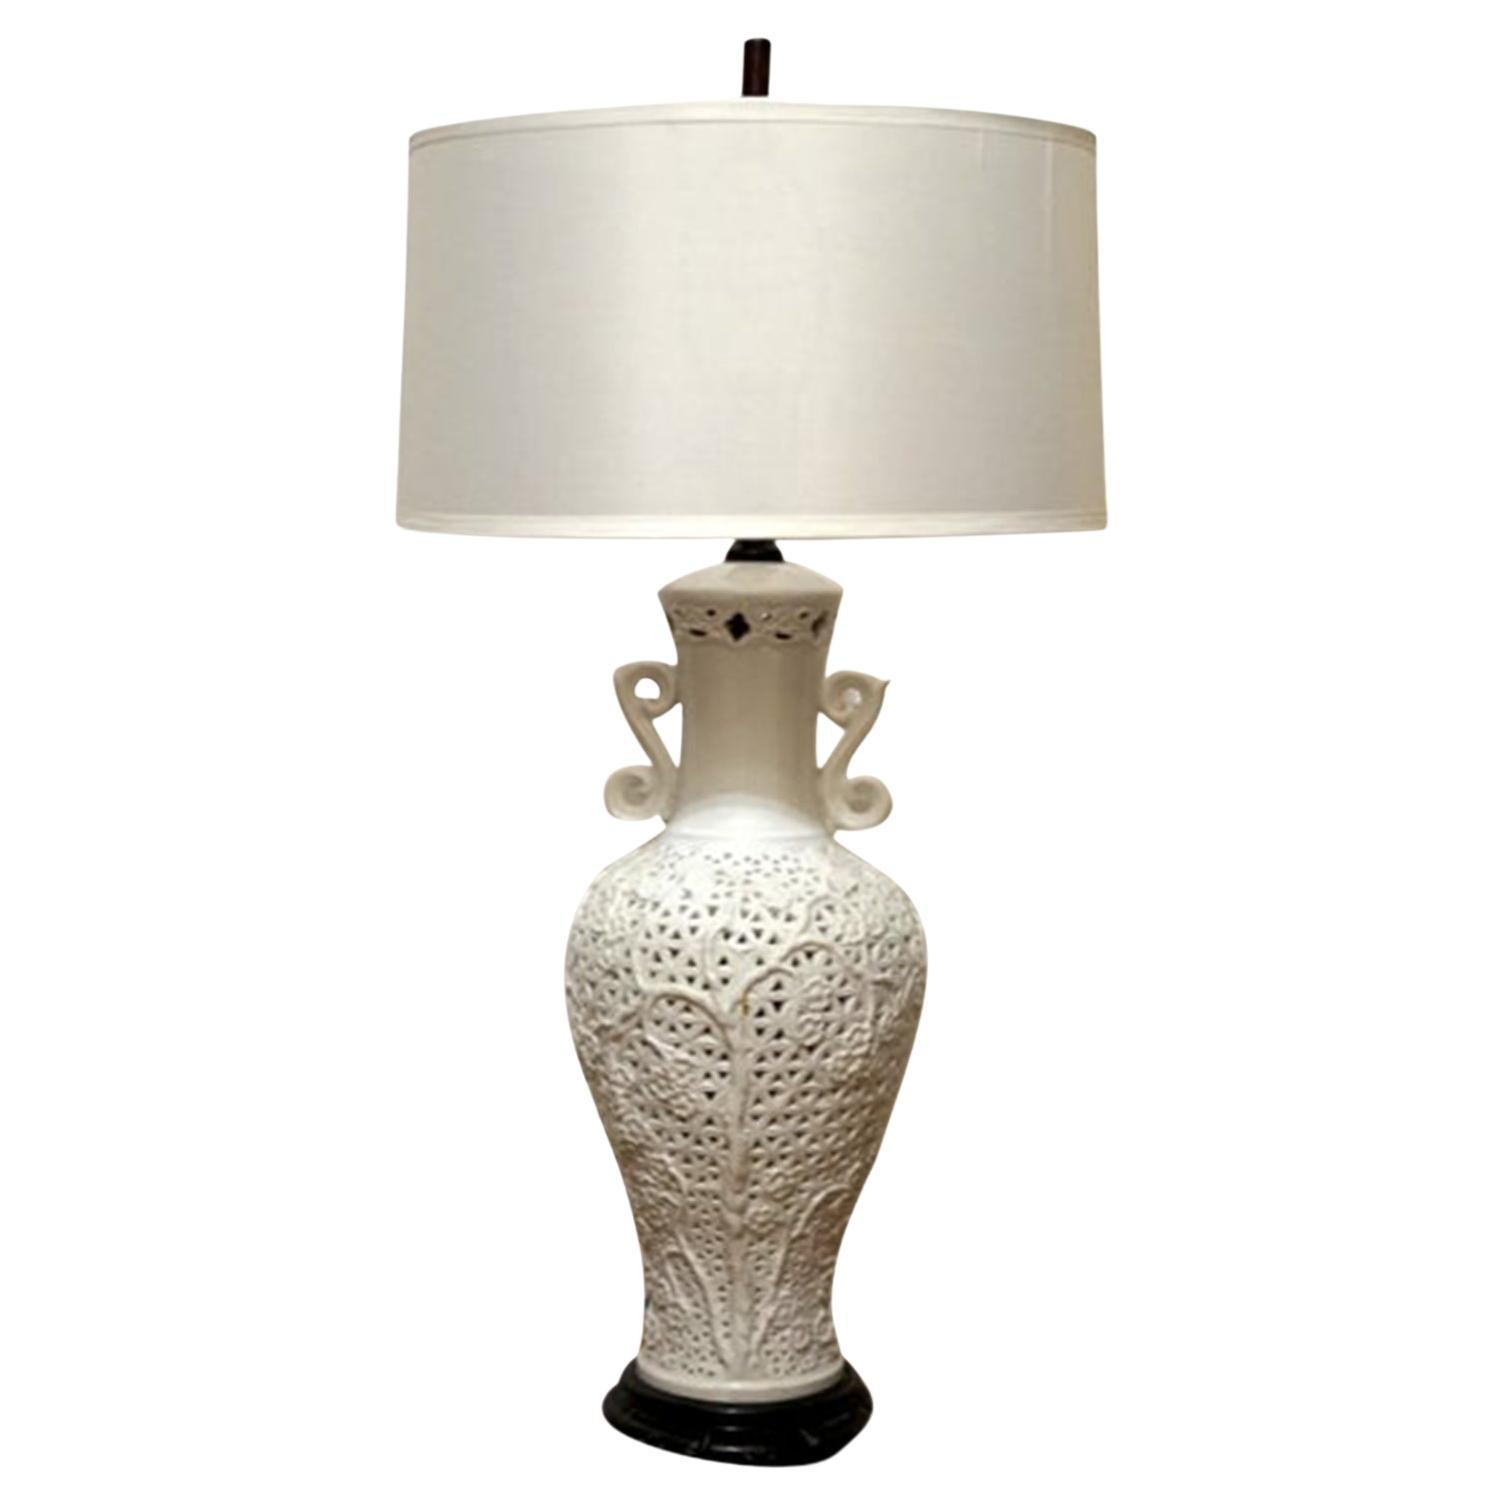 Vintage White Blanc de Chine Baluster form Pierced Table Lamp and Shade For Sale